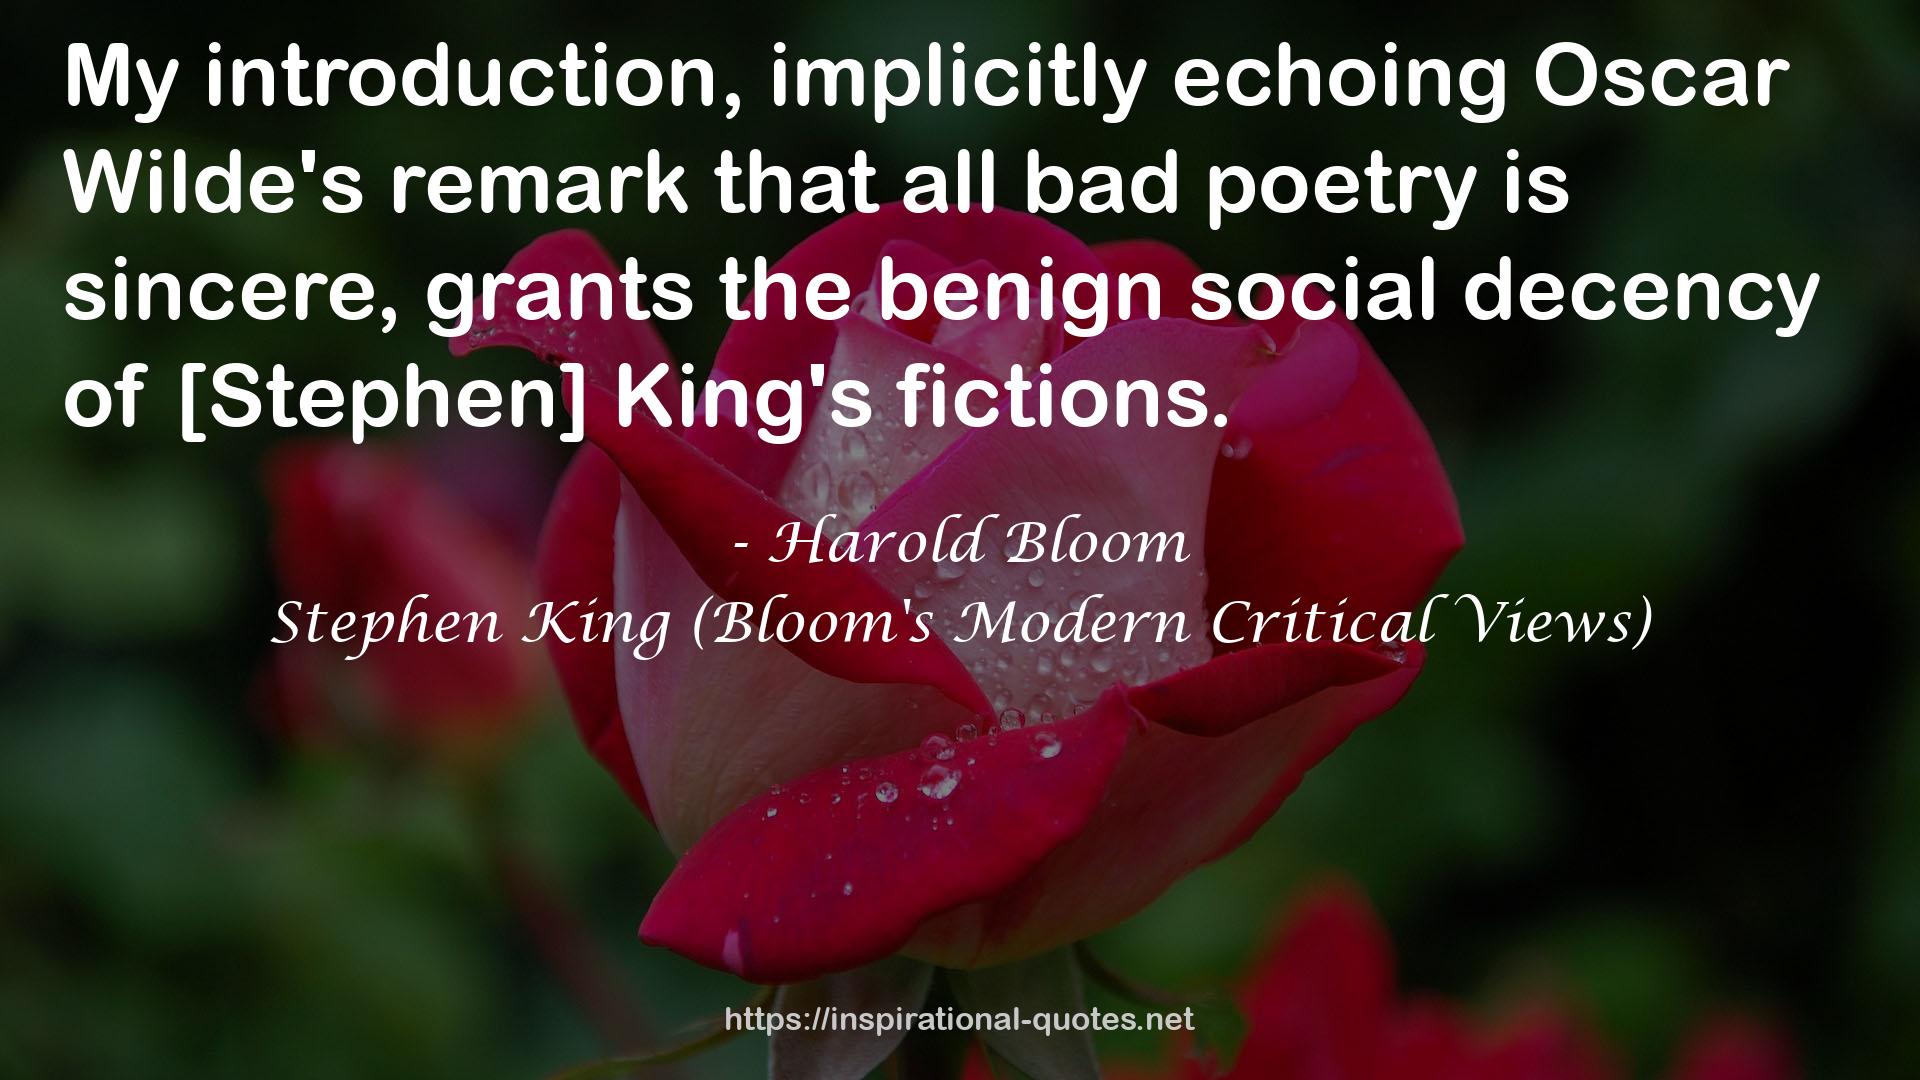 Stephen King (Bloom's Modern Critical Views) QUOTES